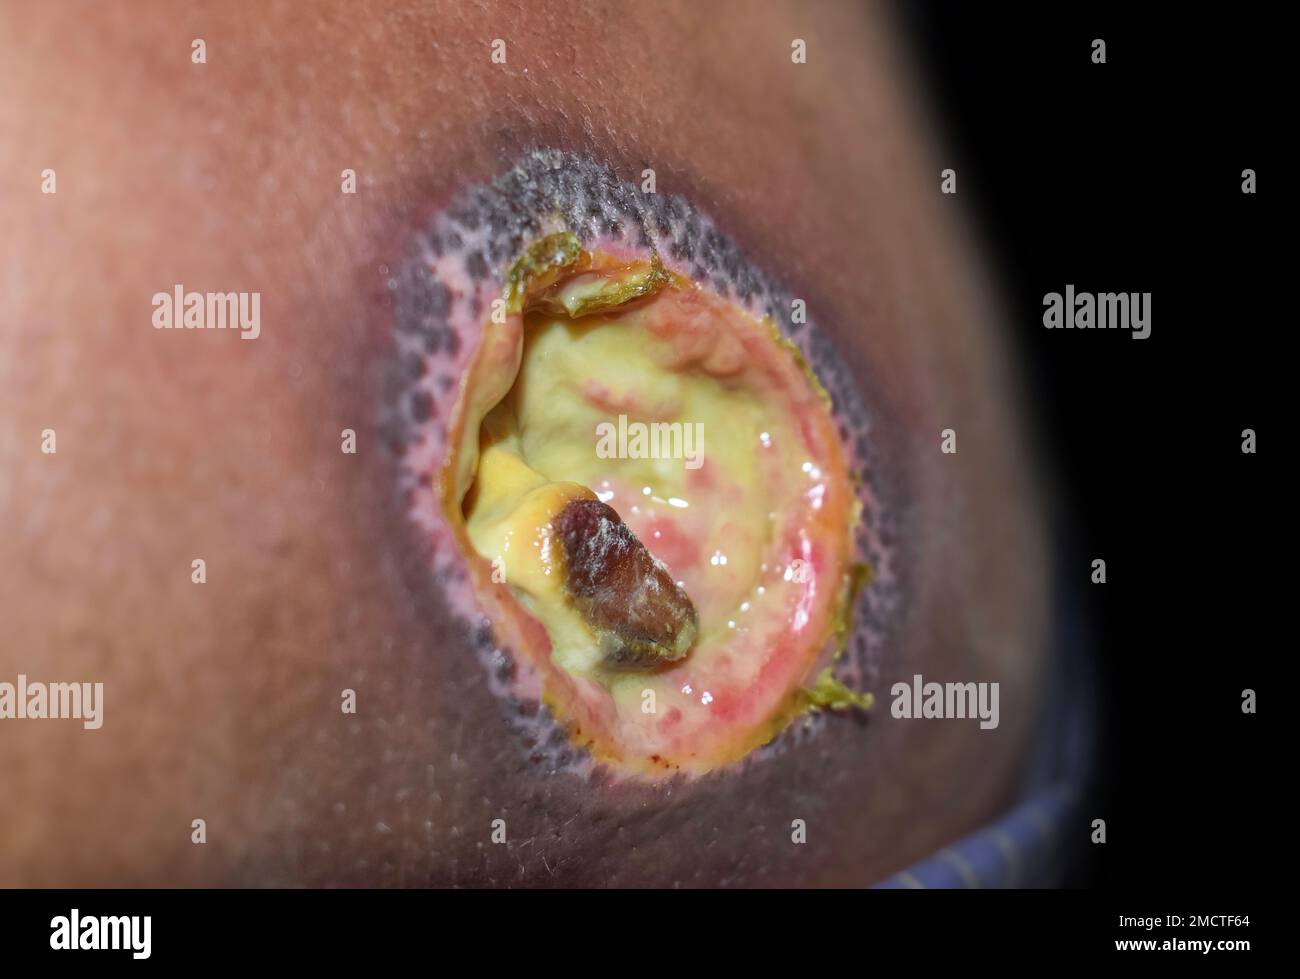 Bed sore aslo called pressure ulcer at tha back. Lateral view. Stock Photo